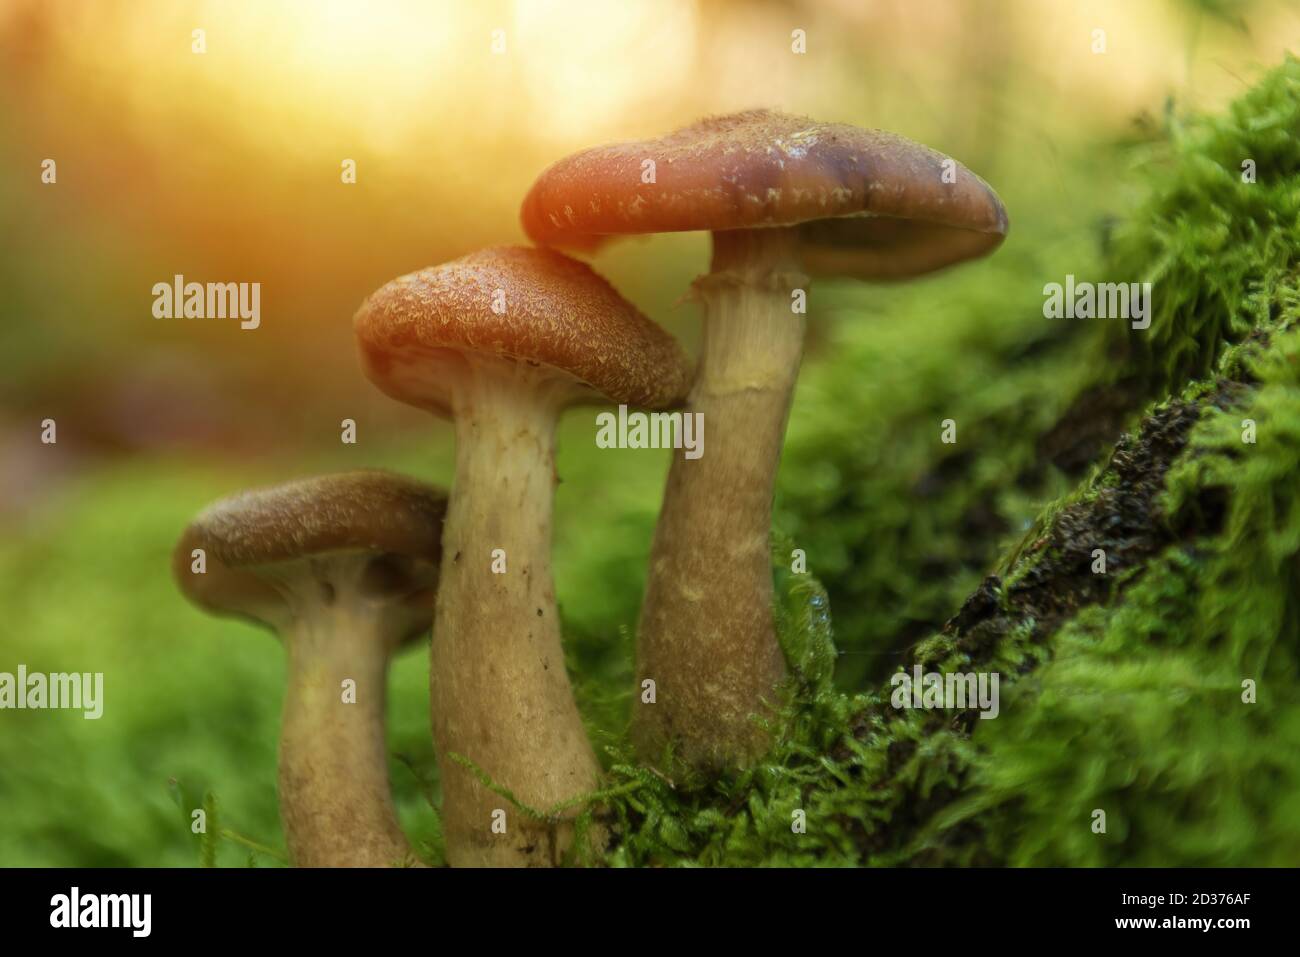 Wild mushrooms in the forest. Stock Photo